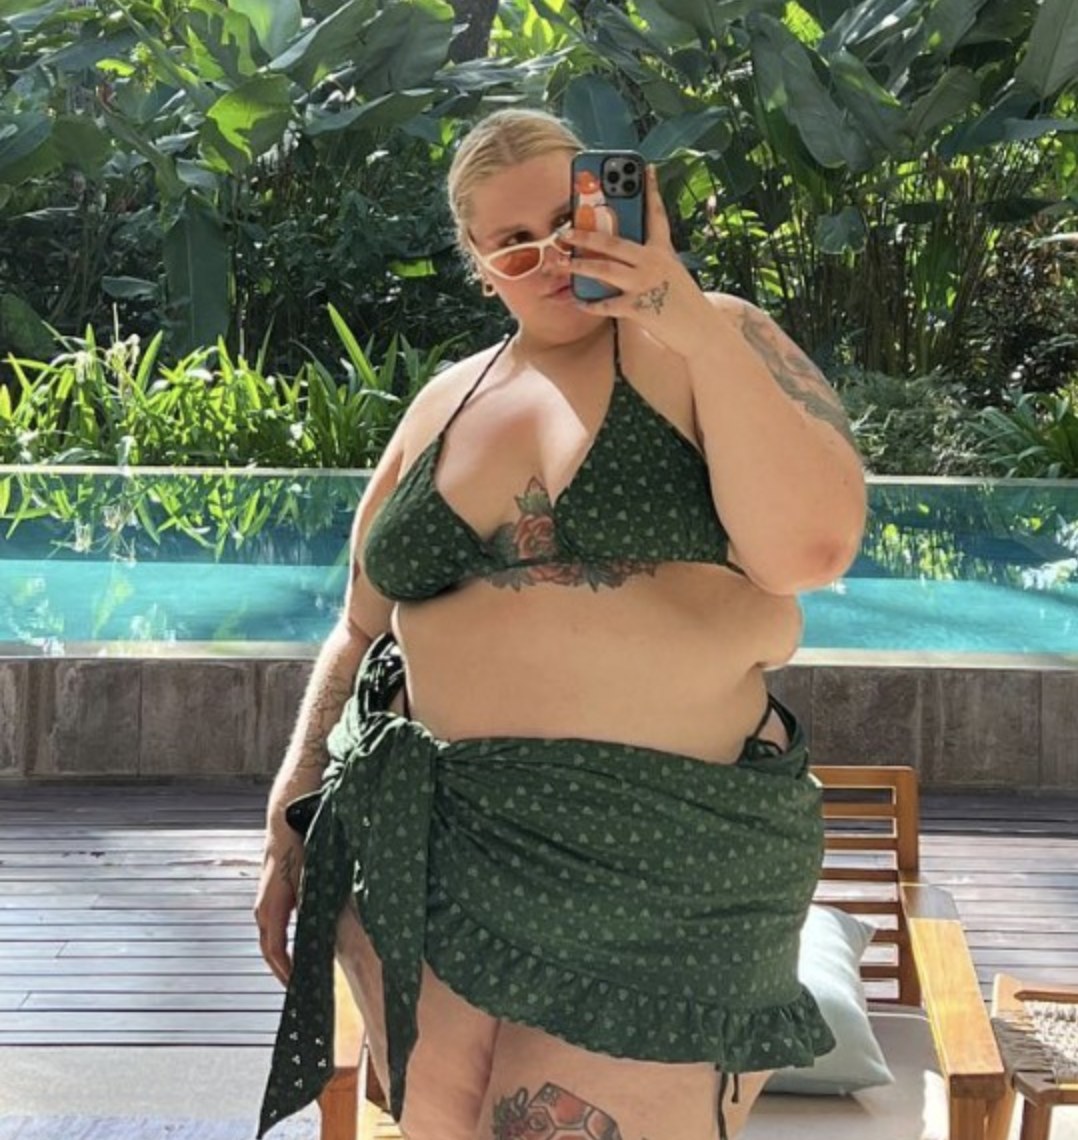 Plus-sized model claps back at trolls who attack bikini photos – ‘look away